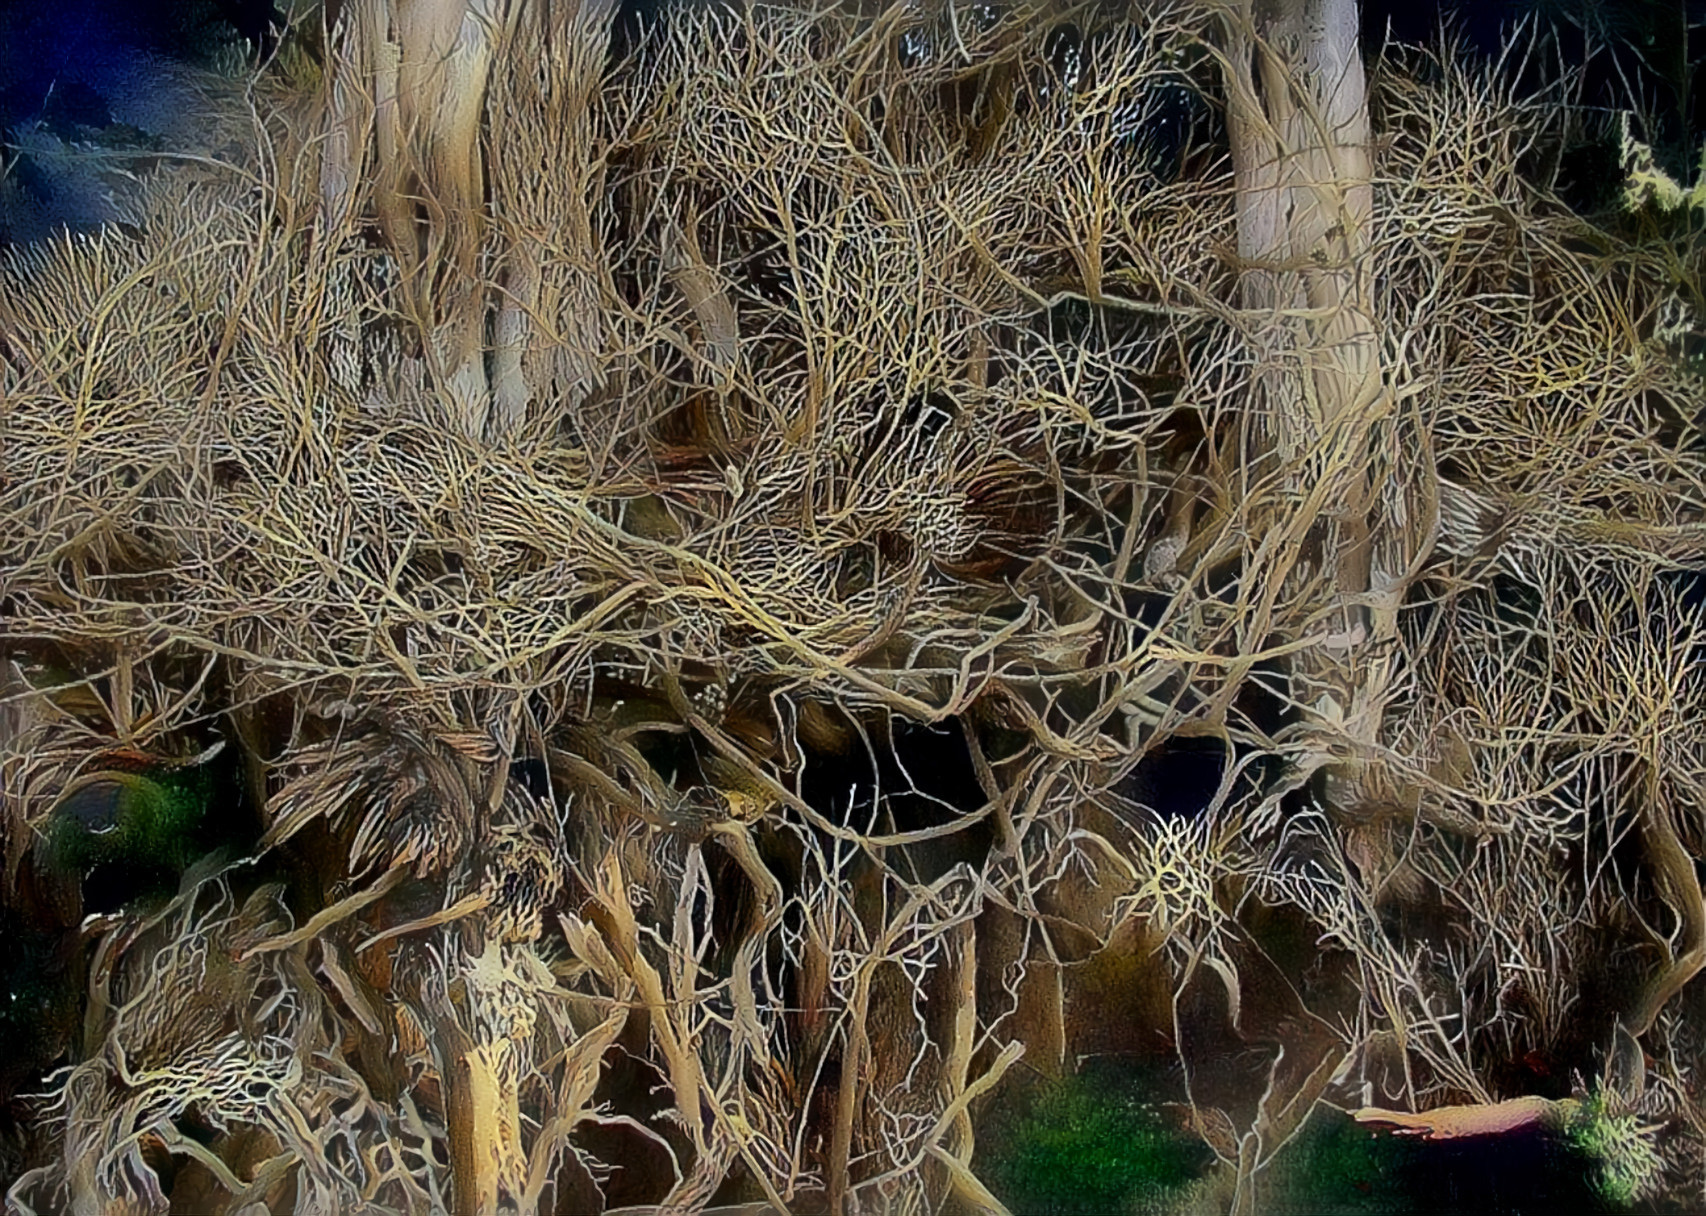 A Winter Tangle of Brush and Erosion-exposed Roots, Pescadero, California.  Original photo is my own.